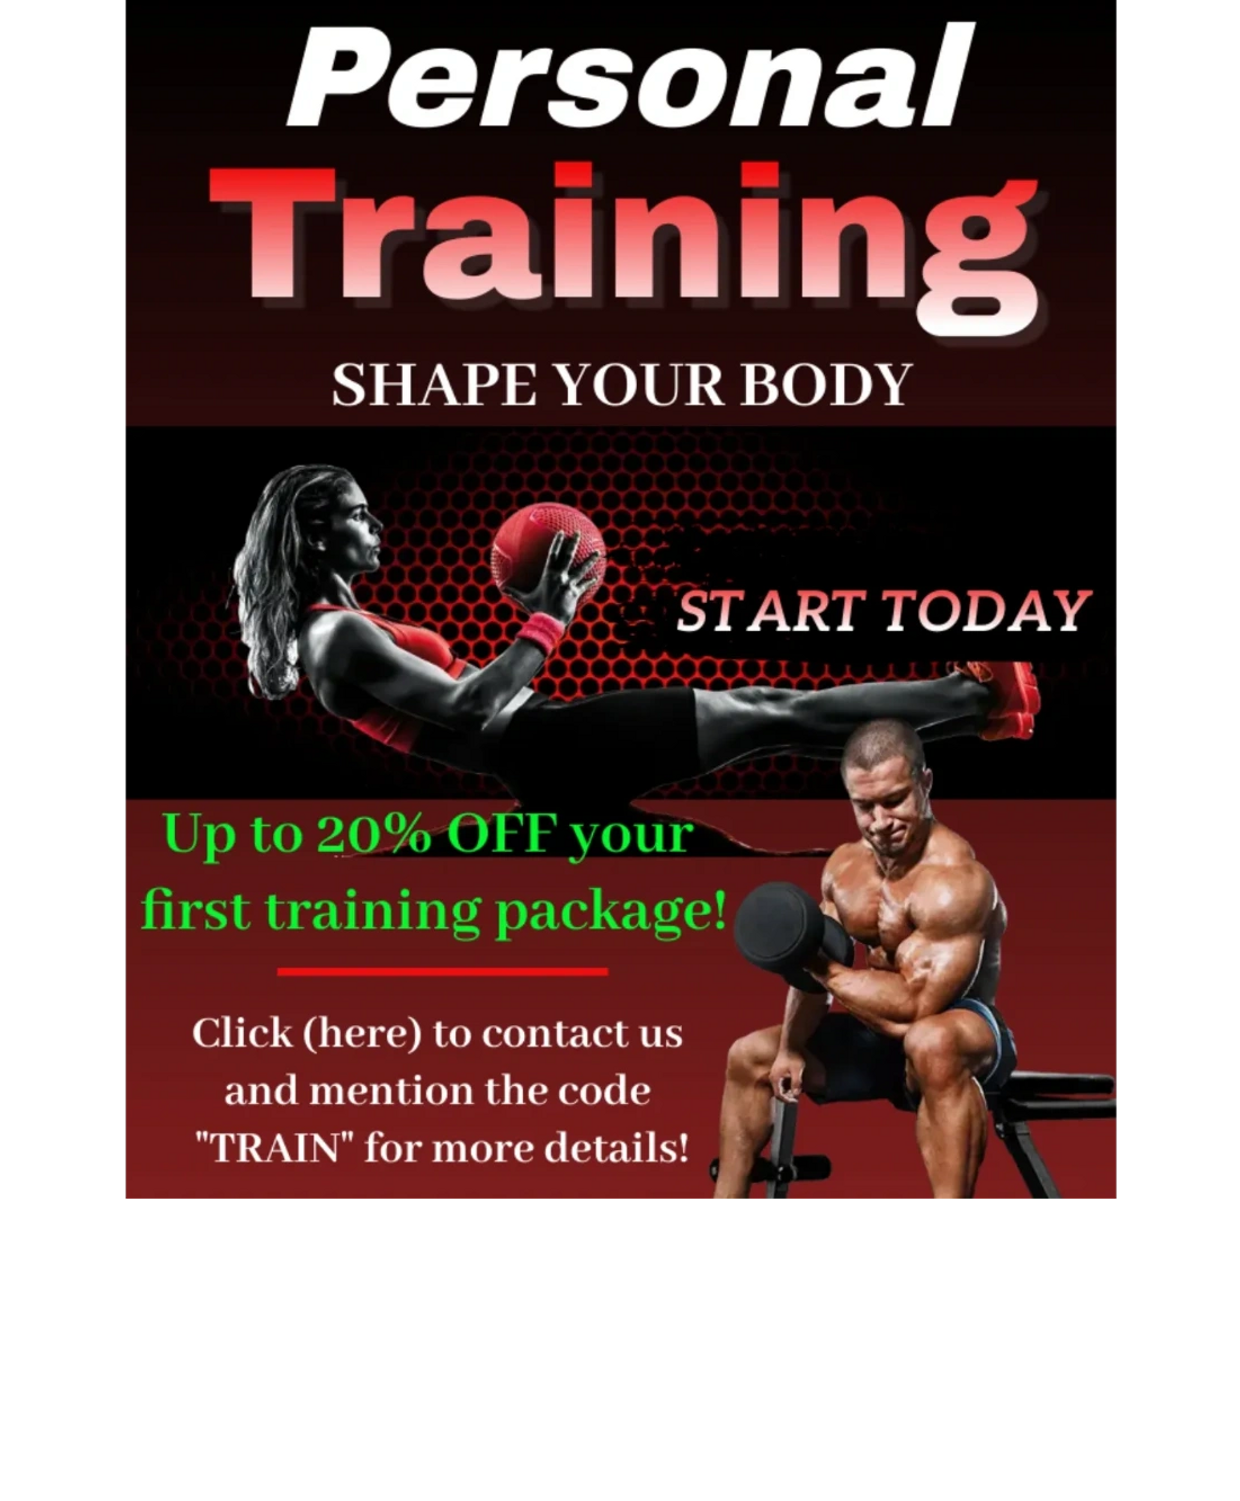 Contact us and mention code "TRAIN" to SAVE up to 20% OFF your first Personal Training Package!!